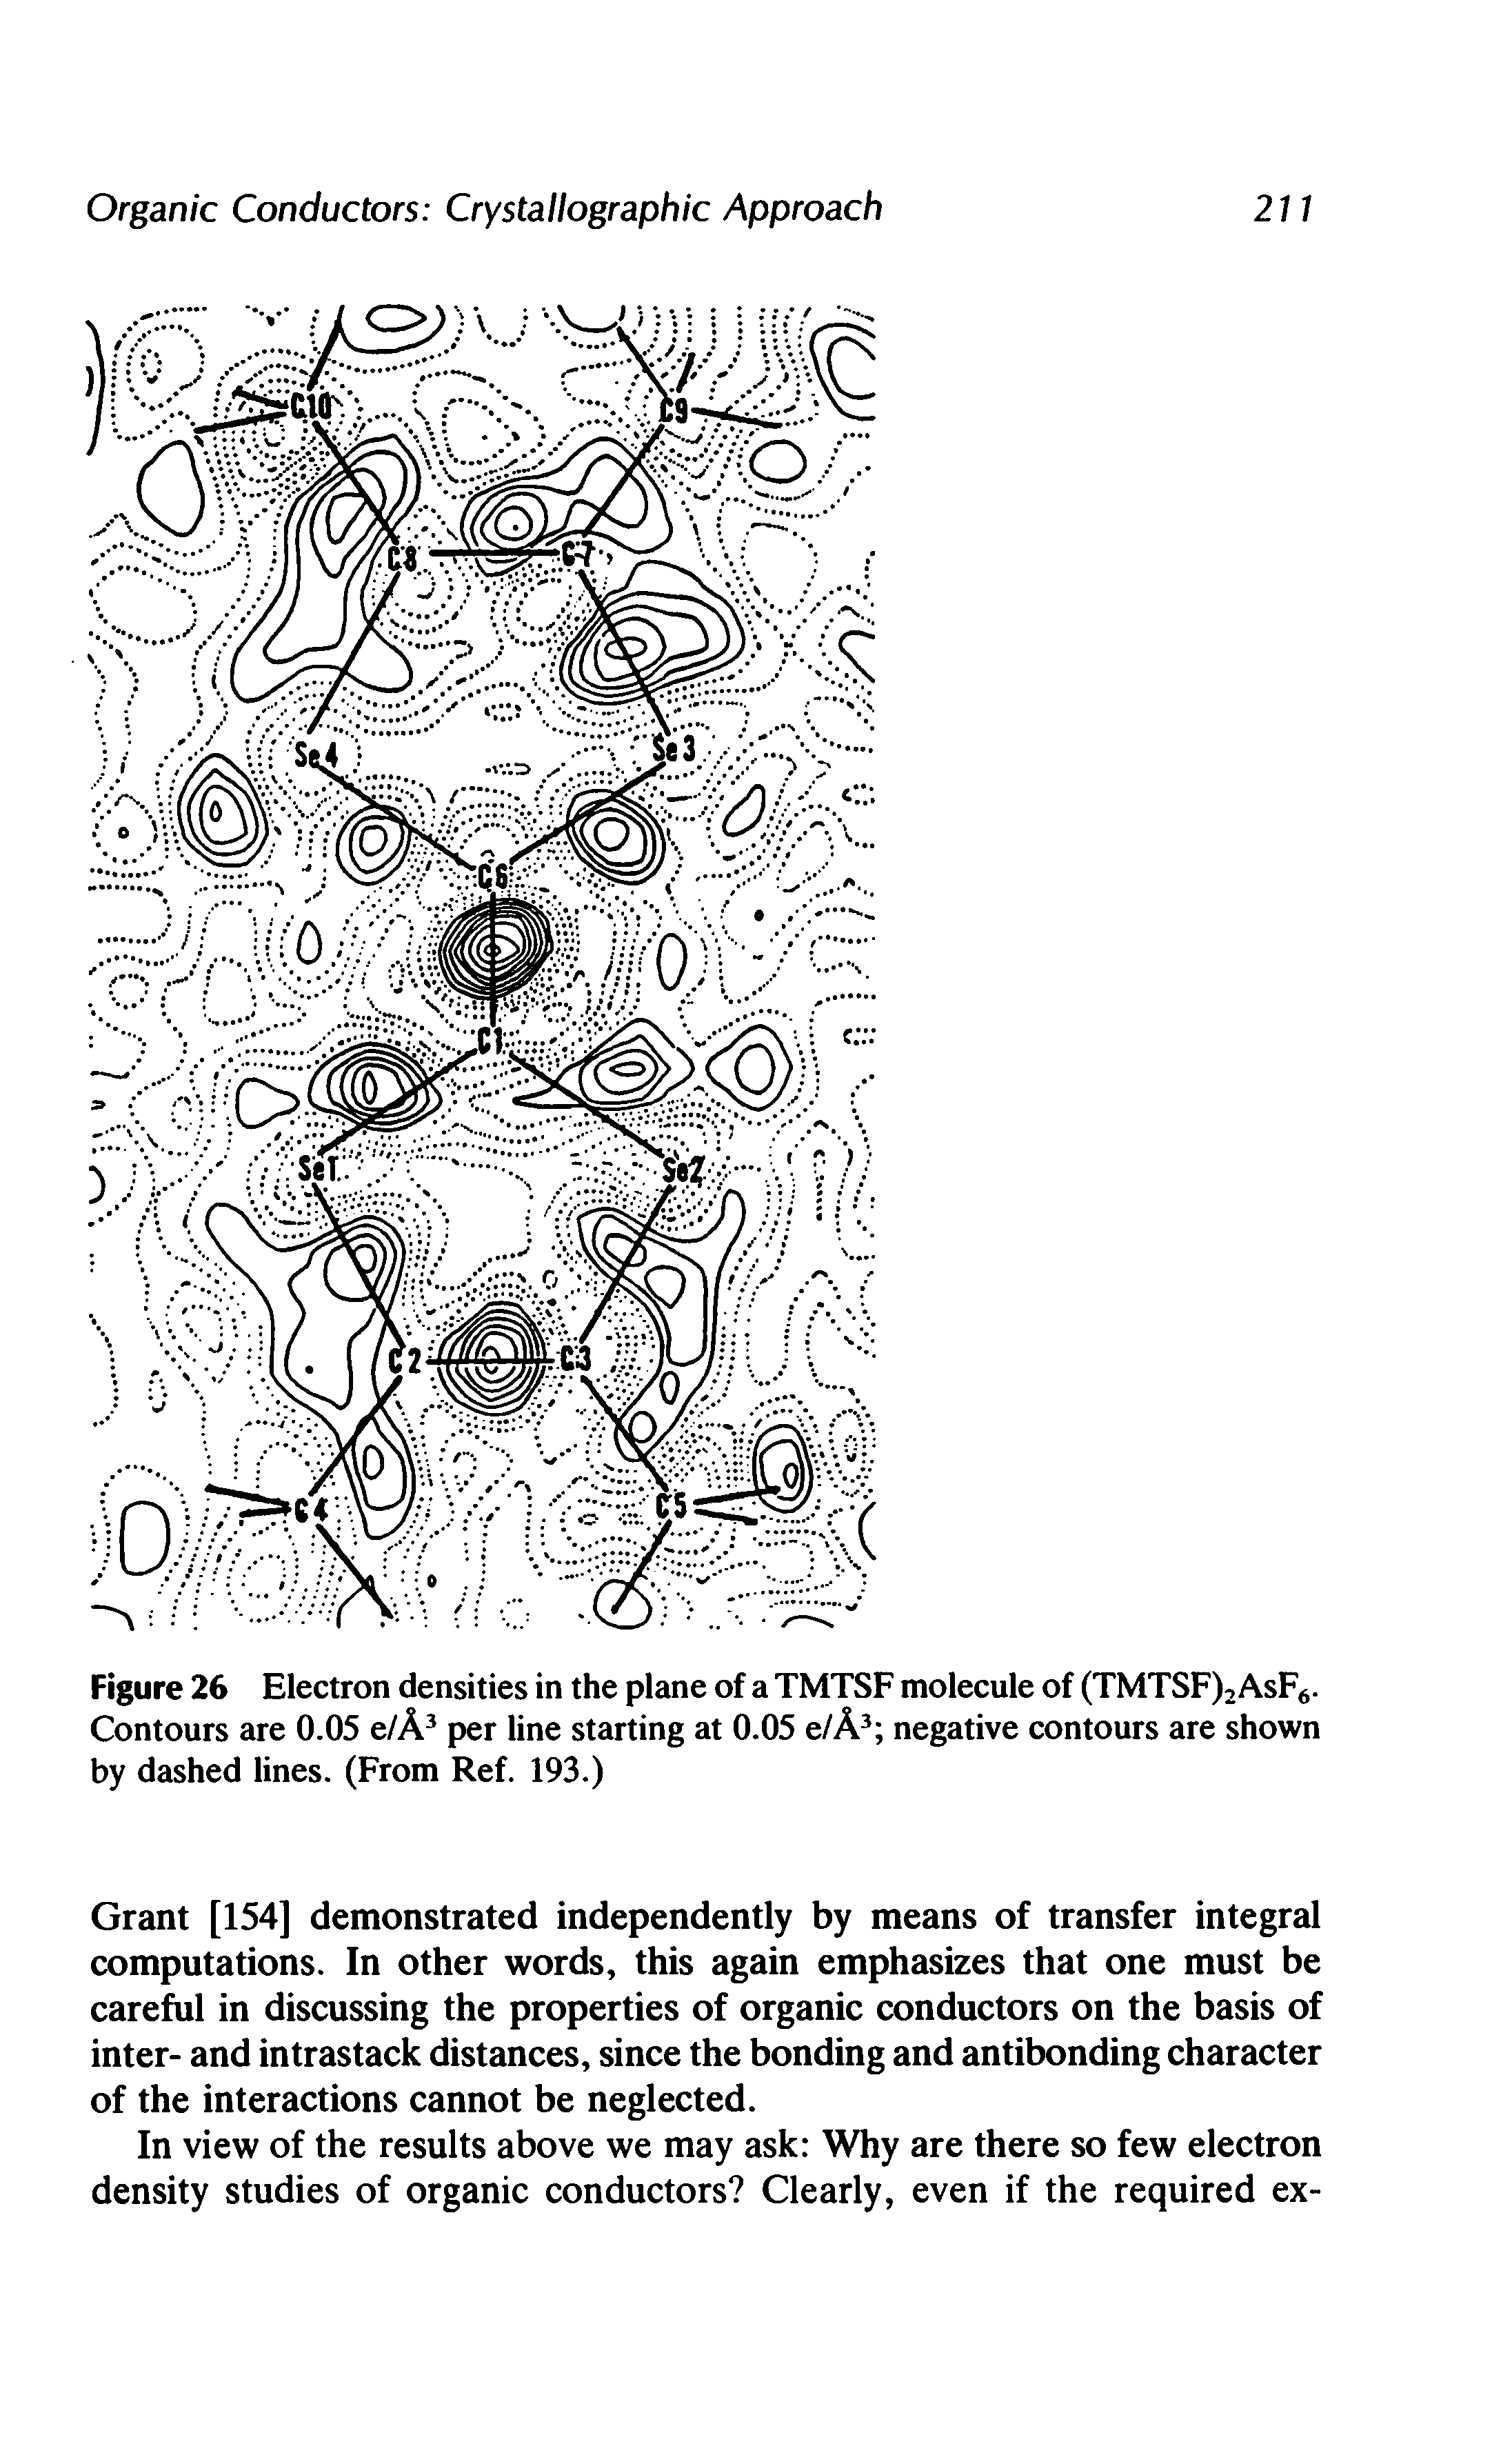 Figure 26 Electron densities in the plane of a TMTSF molecule of (TMTSF)2 AsF6. Contours are 0.05 e/A3 per line starting at 0.05 e/A3 negative contours are shown by dashed lines. (From Ref. 193.)...